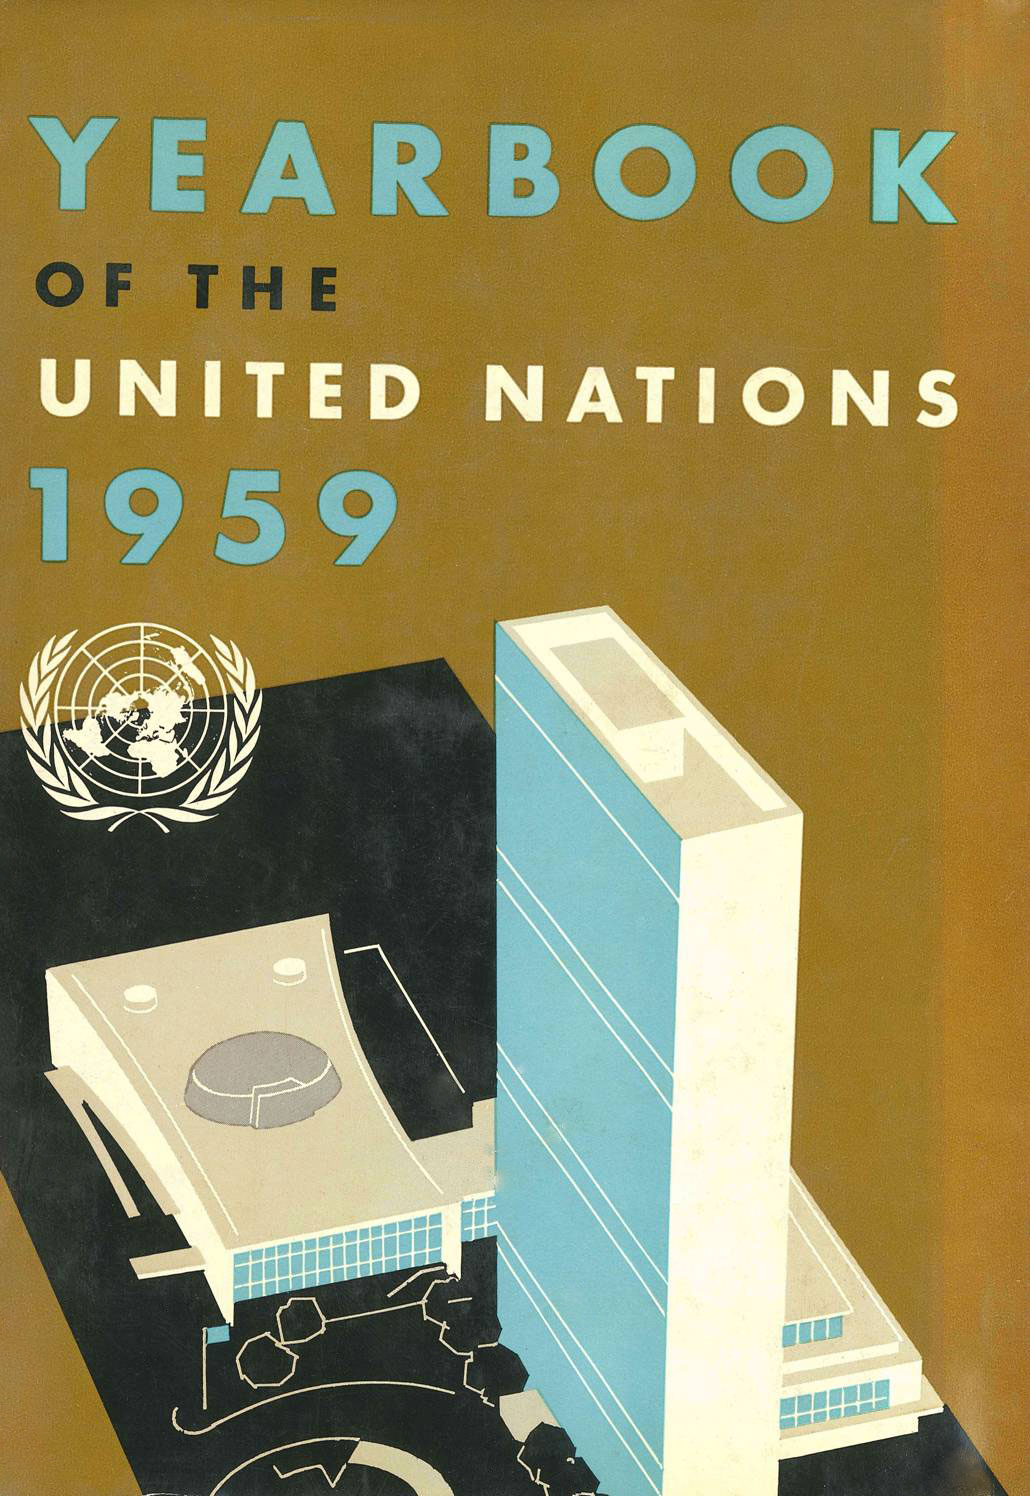 image of Yearbook of the United Nations 1959